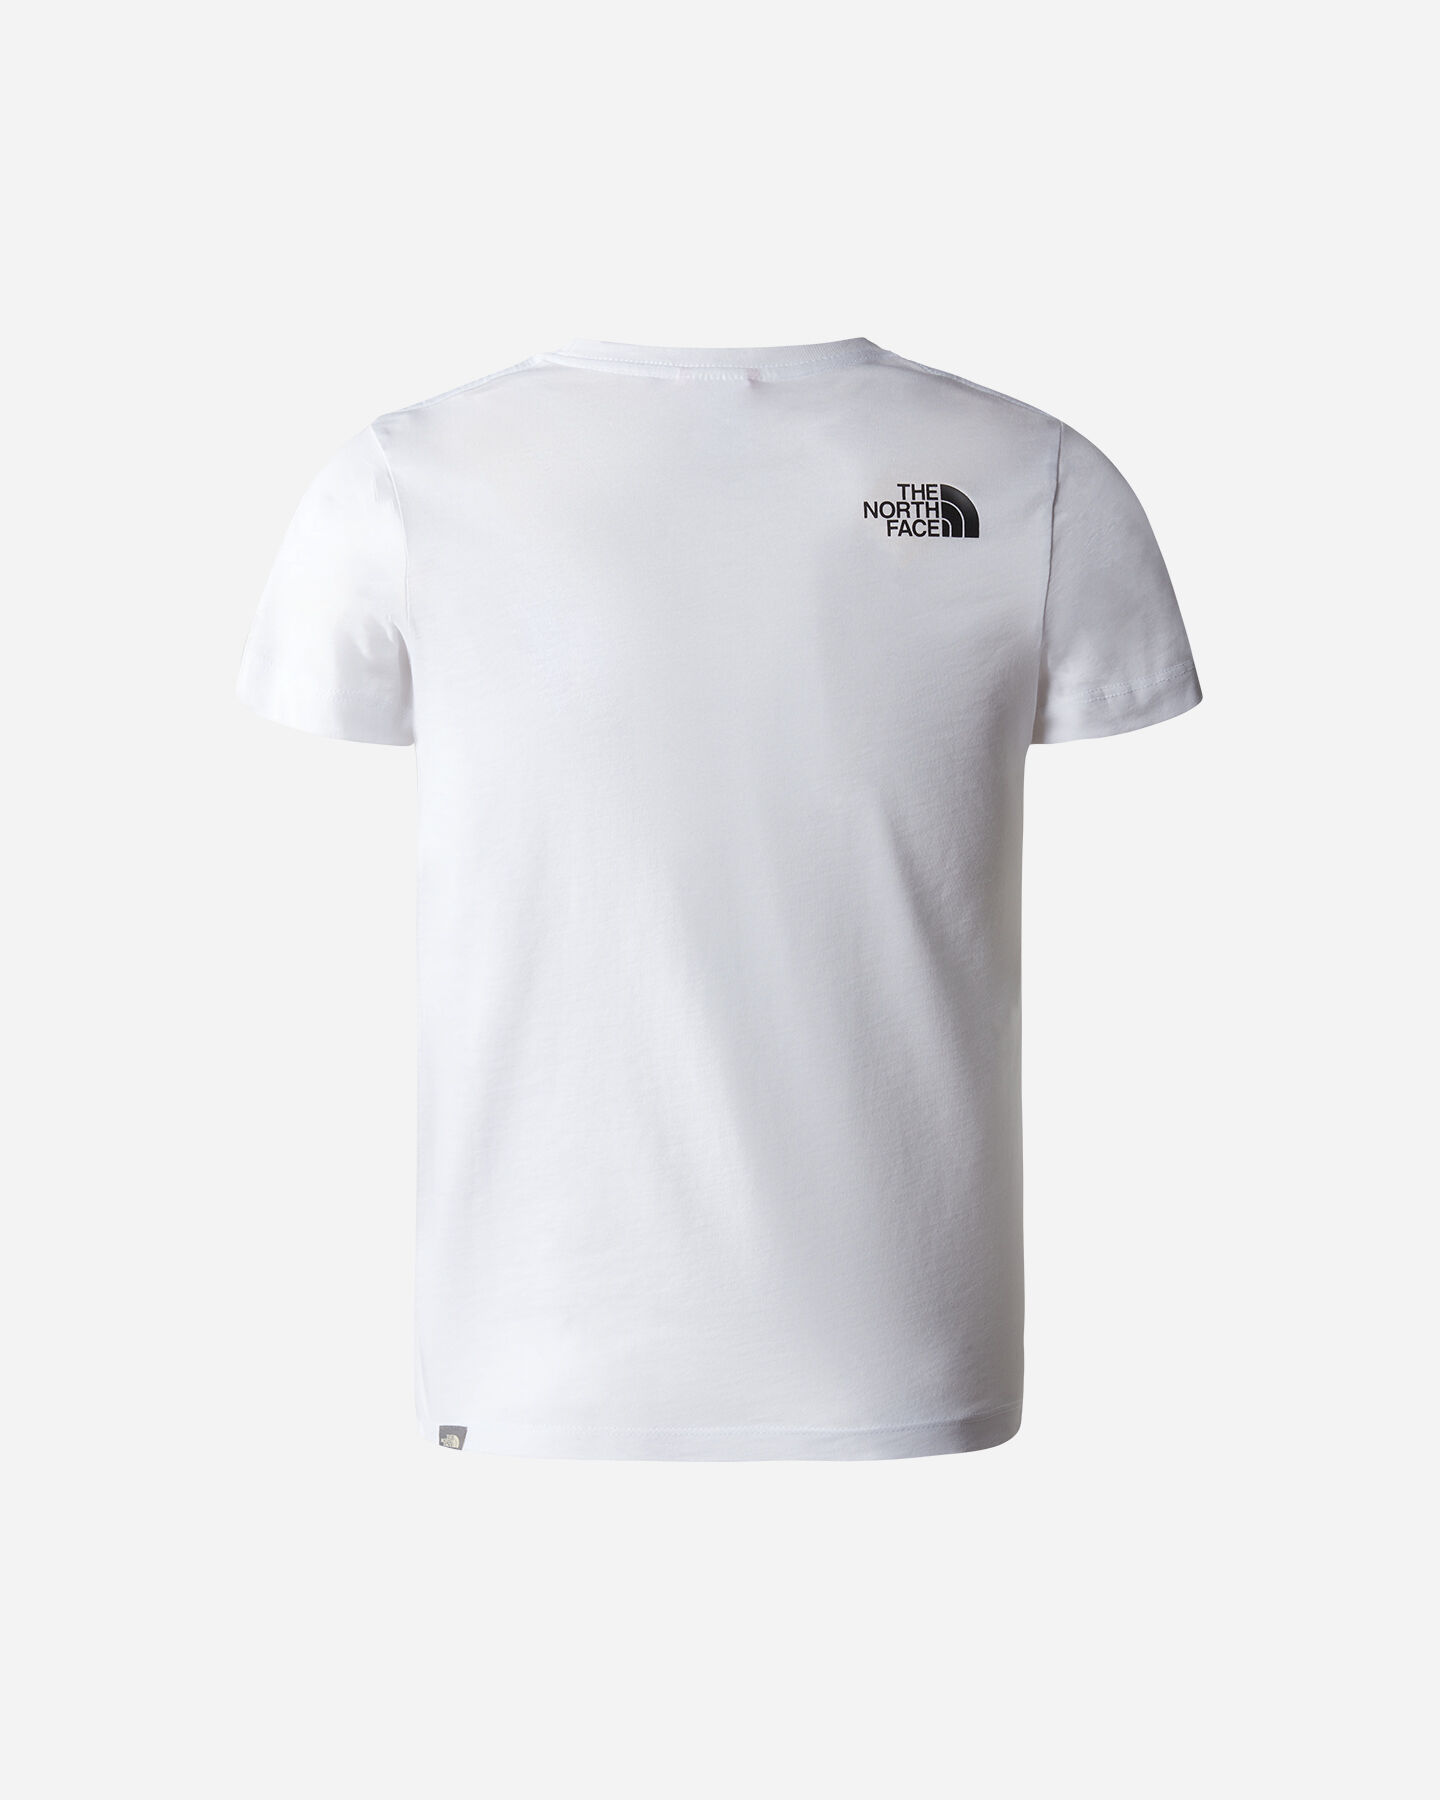  T-Shirt THE NORTH FACE SIMPLE DOME JR S5537336 scatto 1